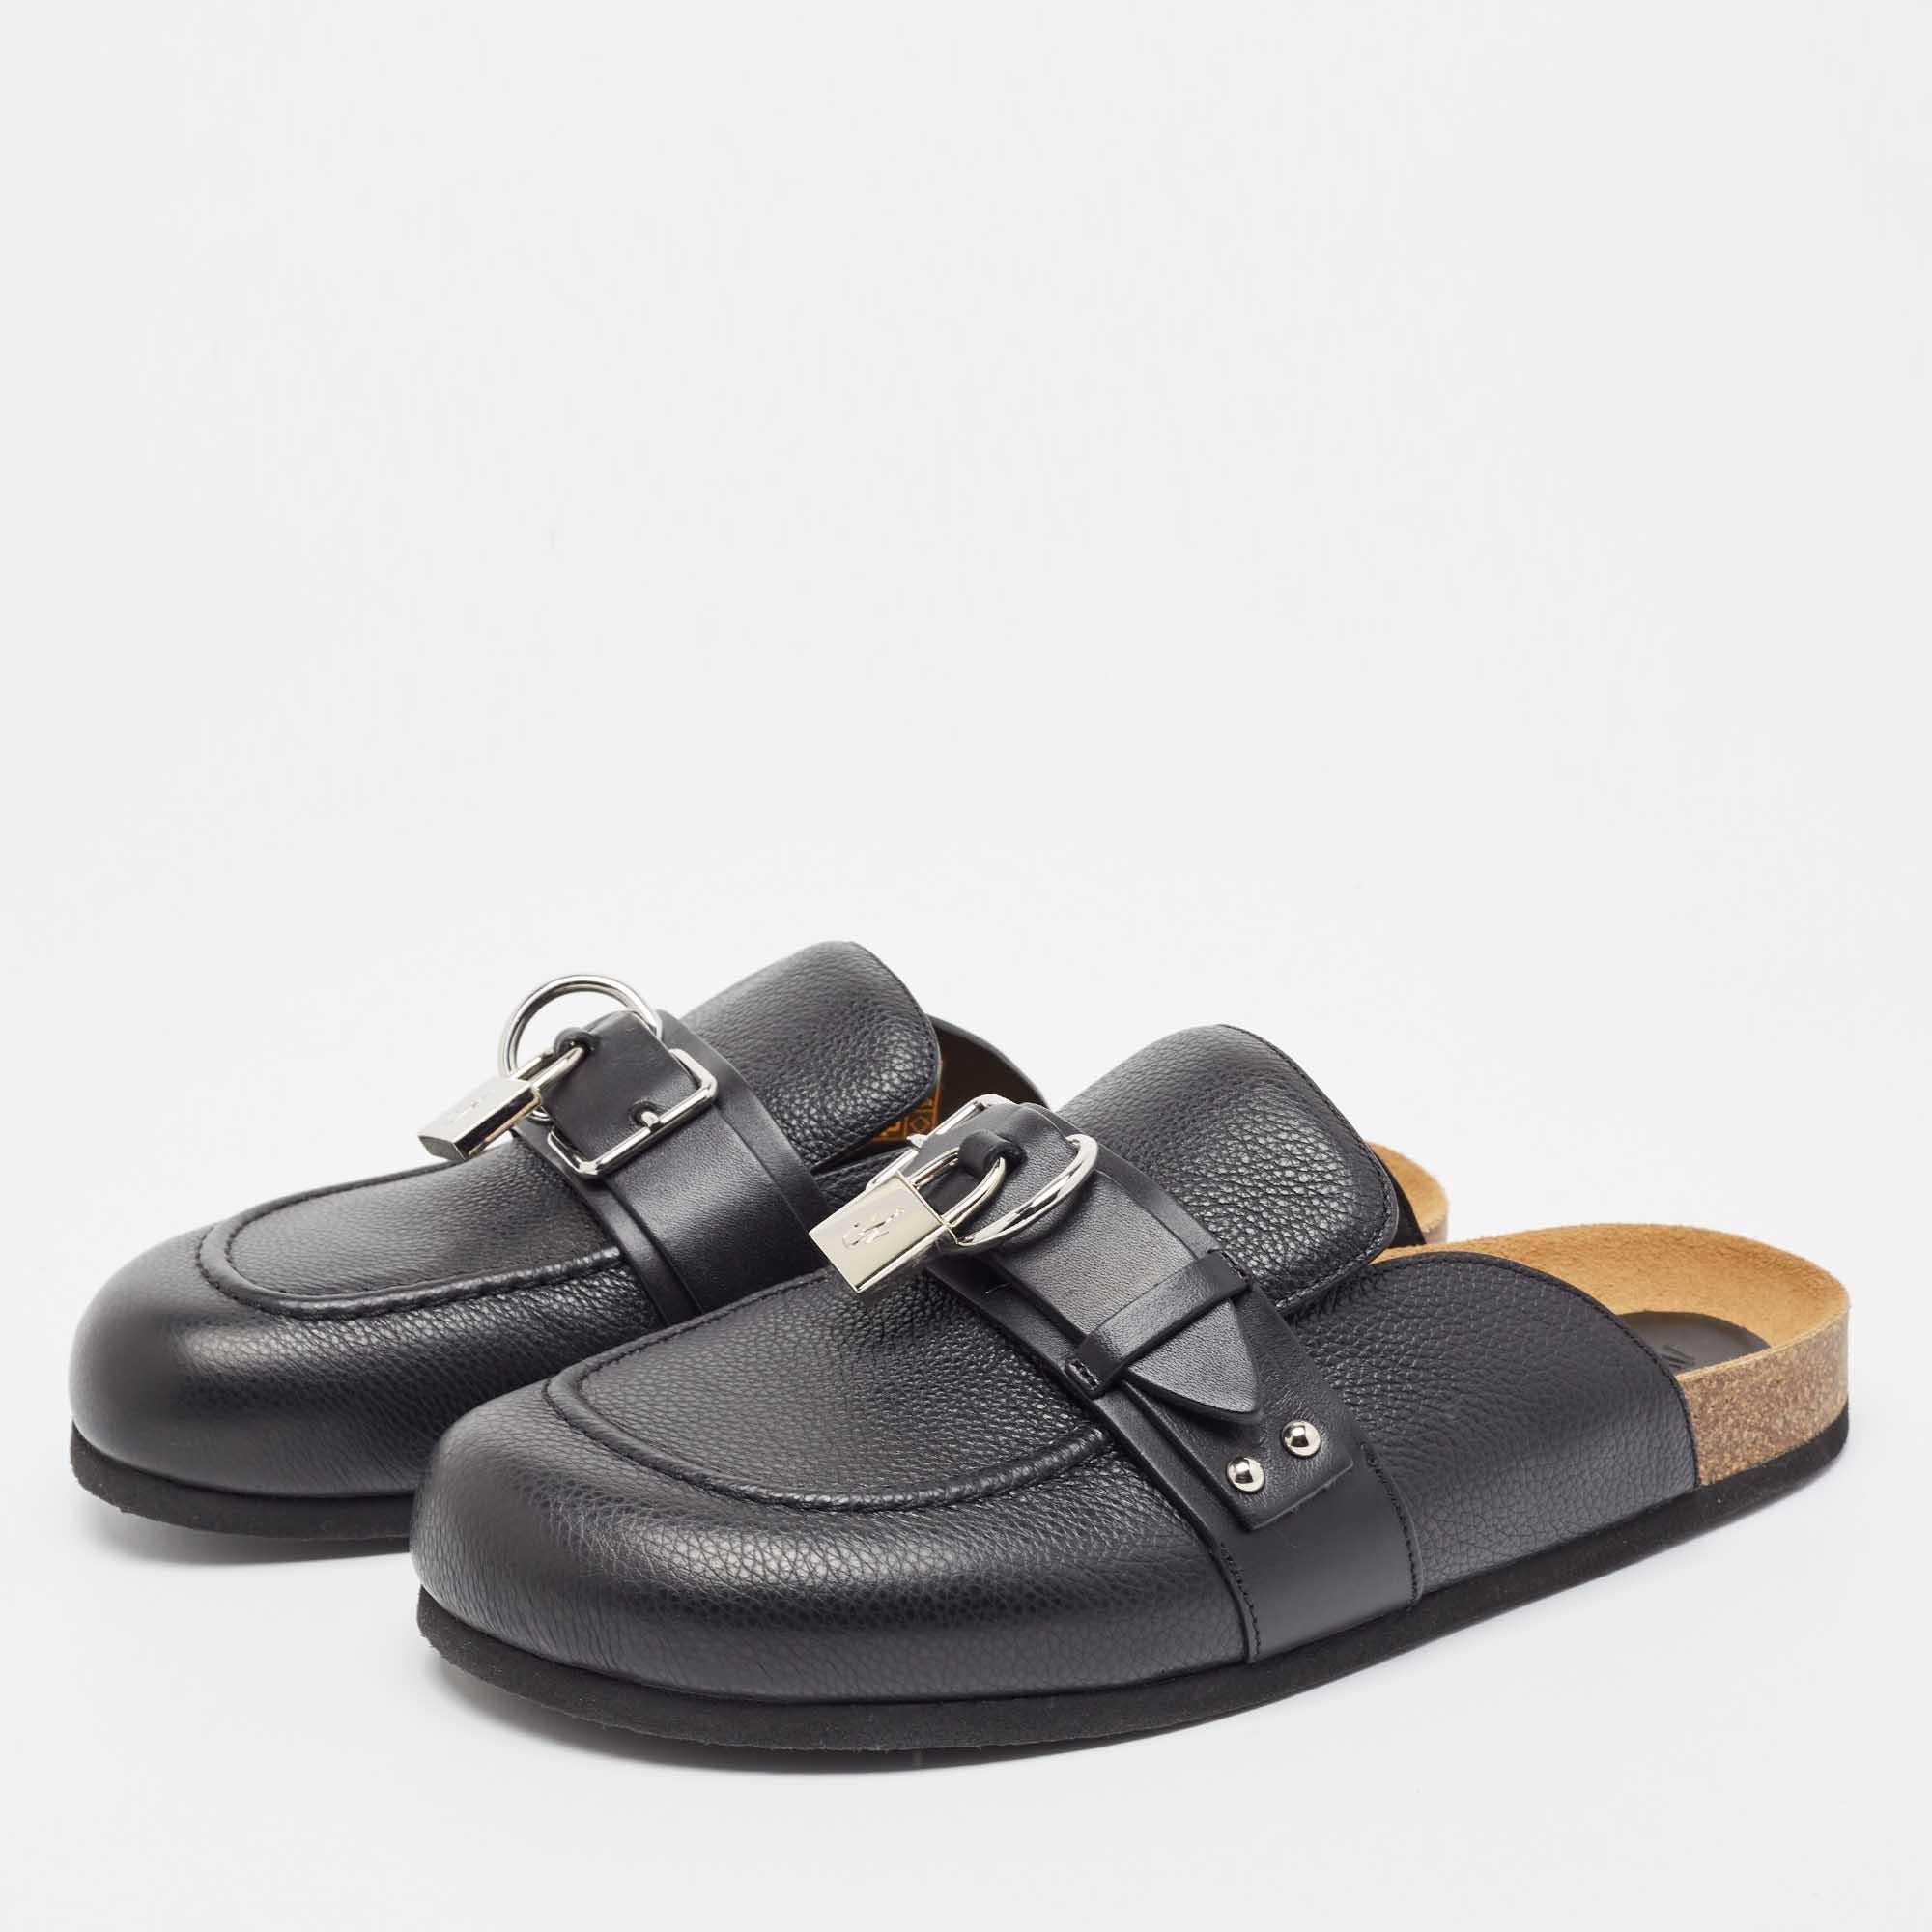 J.W.Anderson Black Leather Padlock Flat Mules Size 42 For Sale 4